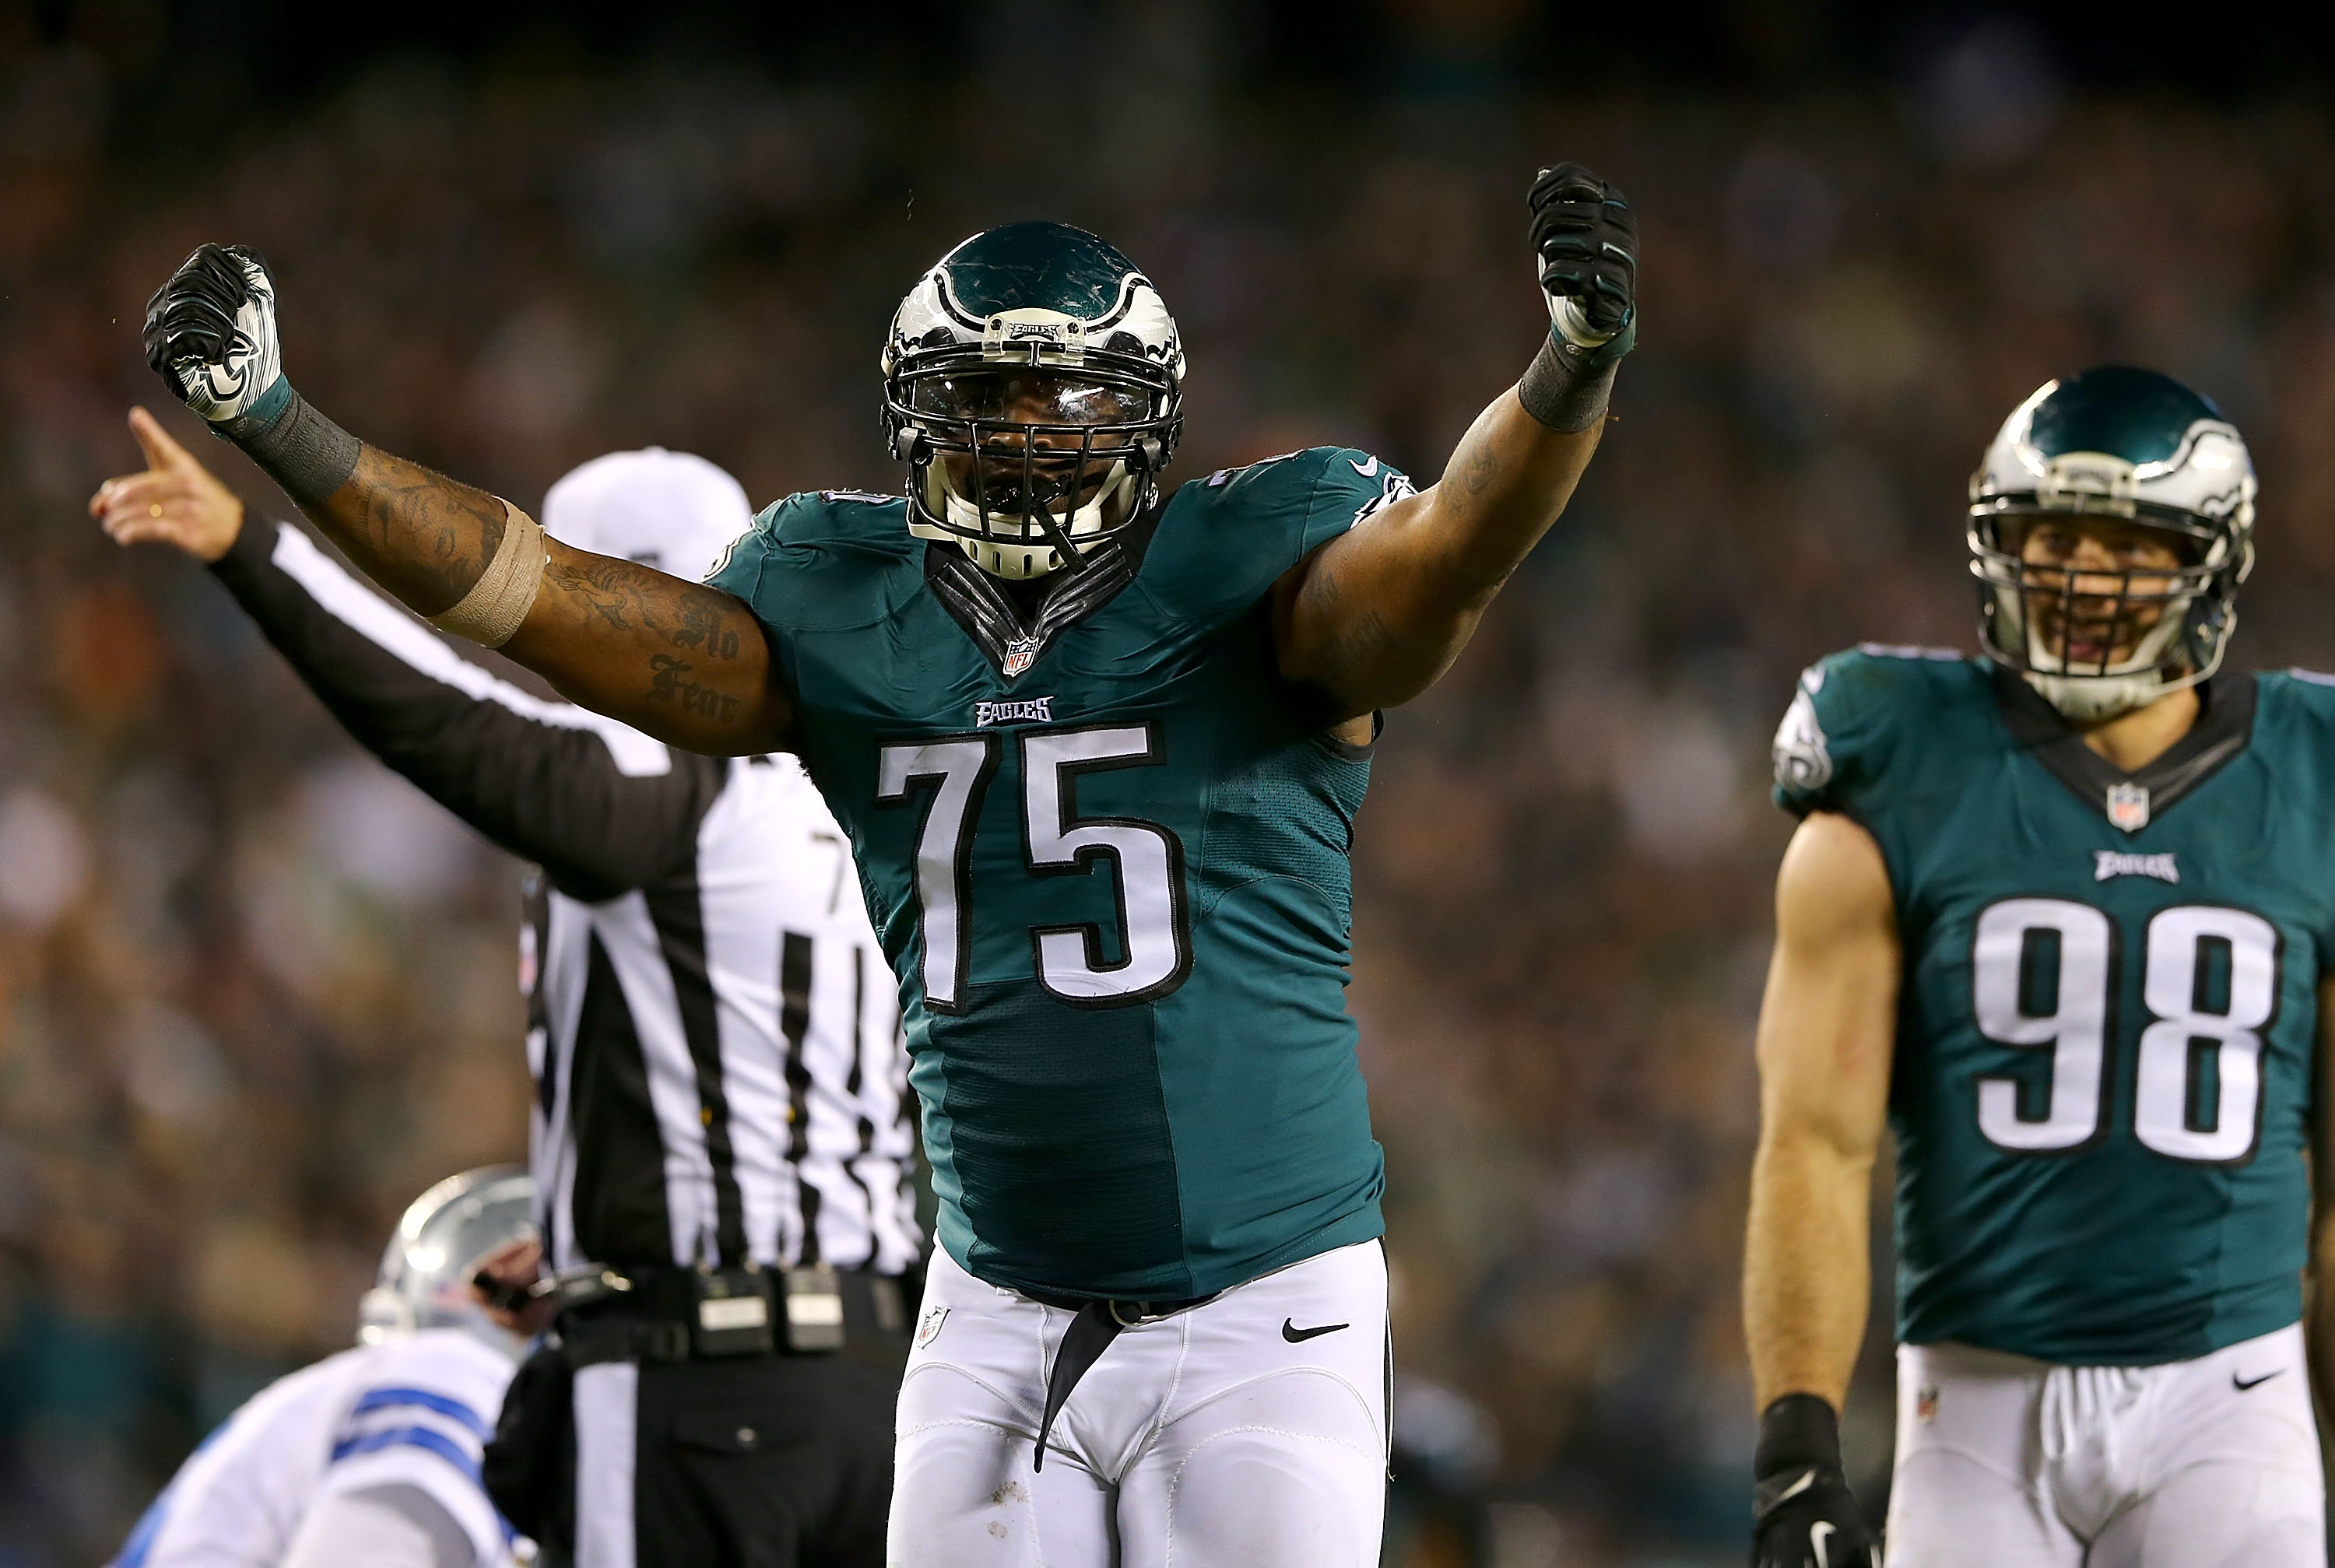 PHILADELPHIA, PA - DECEMBER 14: Vinny Curry #75 of the Philadelphia Eagles reacts during the game against the Dallas Cowboys at Lincoln Financial Field on December 14, 2014 in Philadelphia, Pennsylvania. (Photo by Elsa/Getty Images)